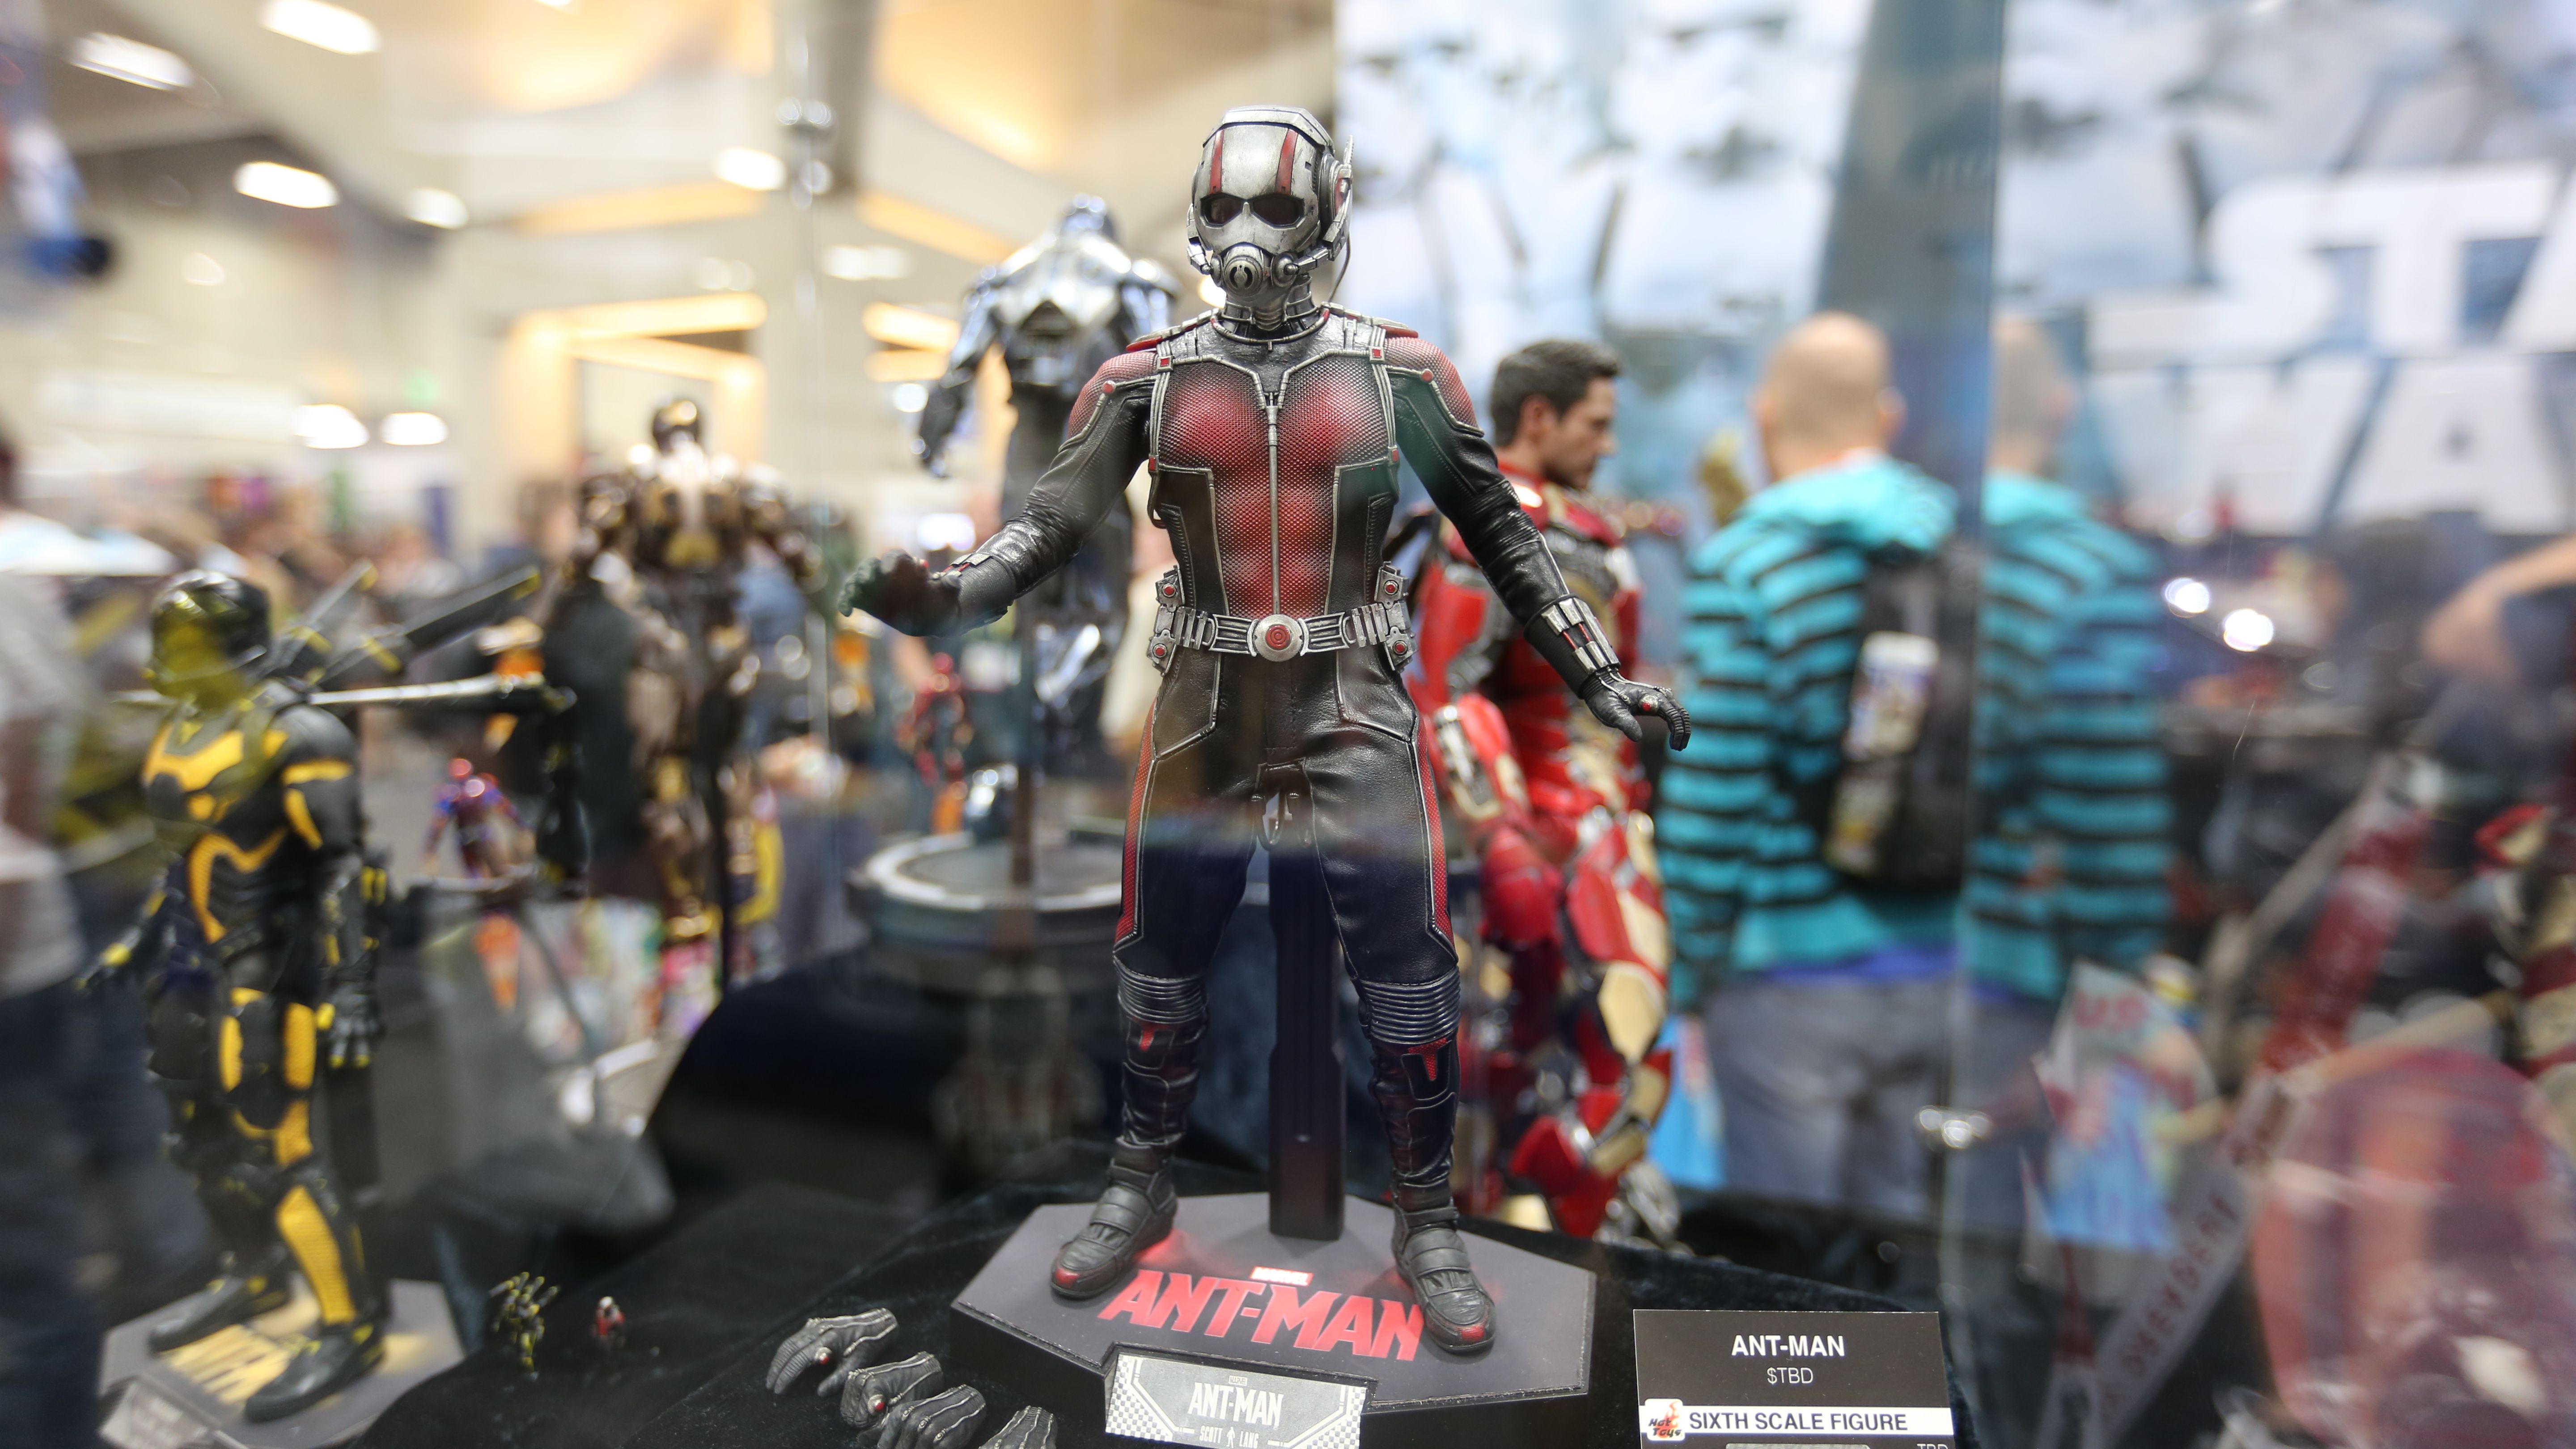 Hot Wheels - Spotted at Comic-Con International: Our Ant-Man character car  hanging at the Marvel booth with the @MarvelAntMan suit. Can't wait to see  this one in theaters in just 4 days!